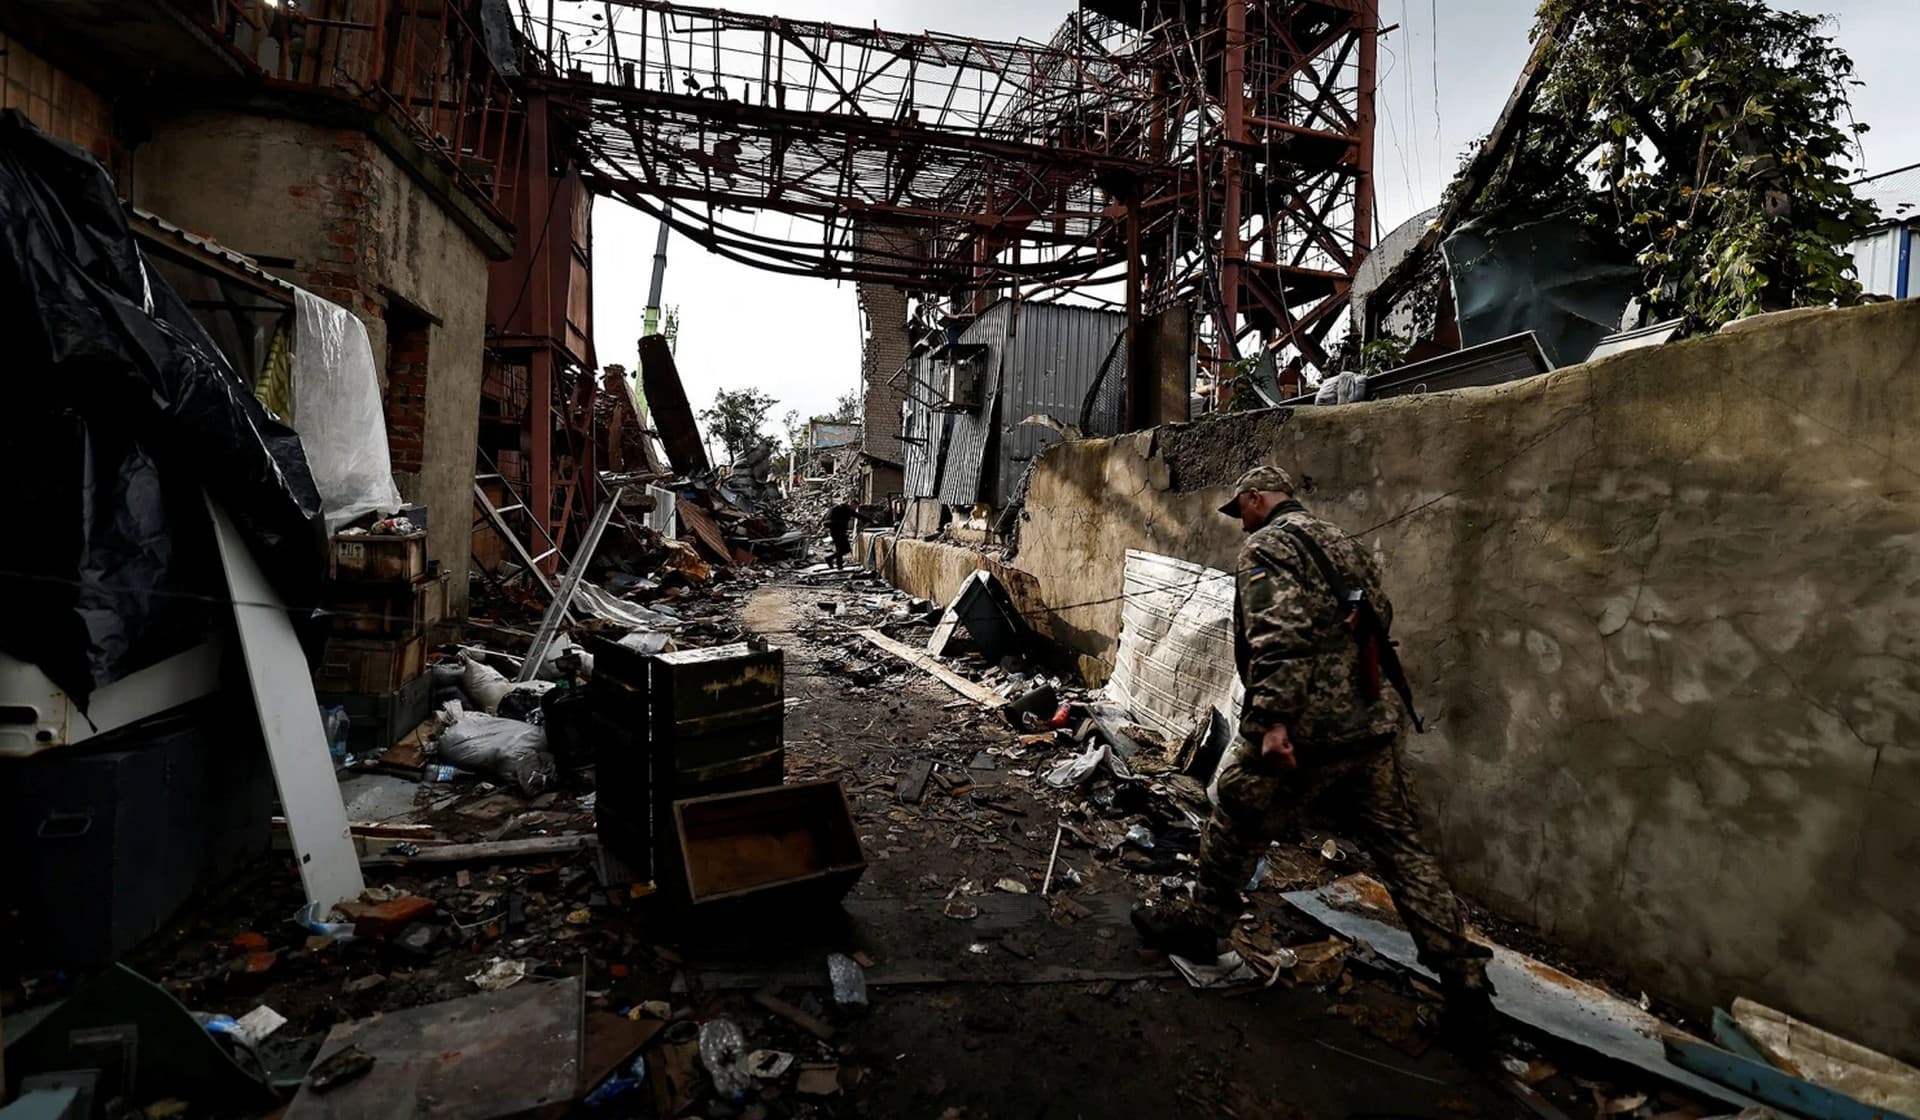 A Ukranian army soldiers walks where firefighters and Ukrainian army solders search for bodies of people among remains of a building in the recently liberated town of Izium